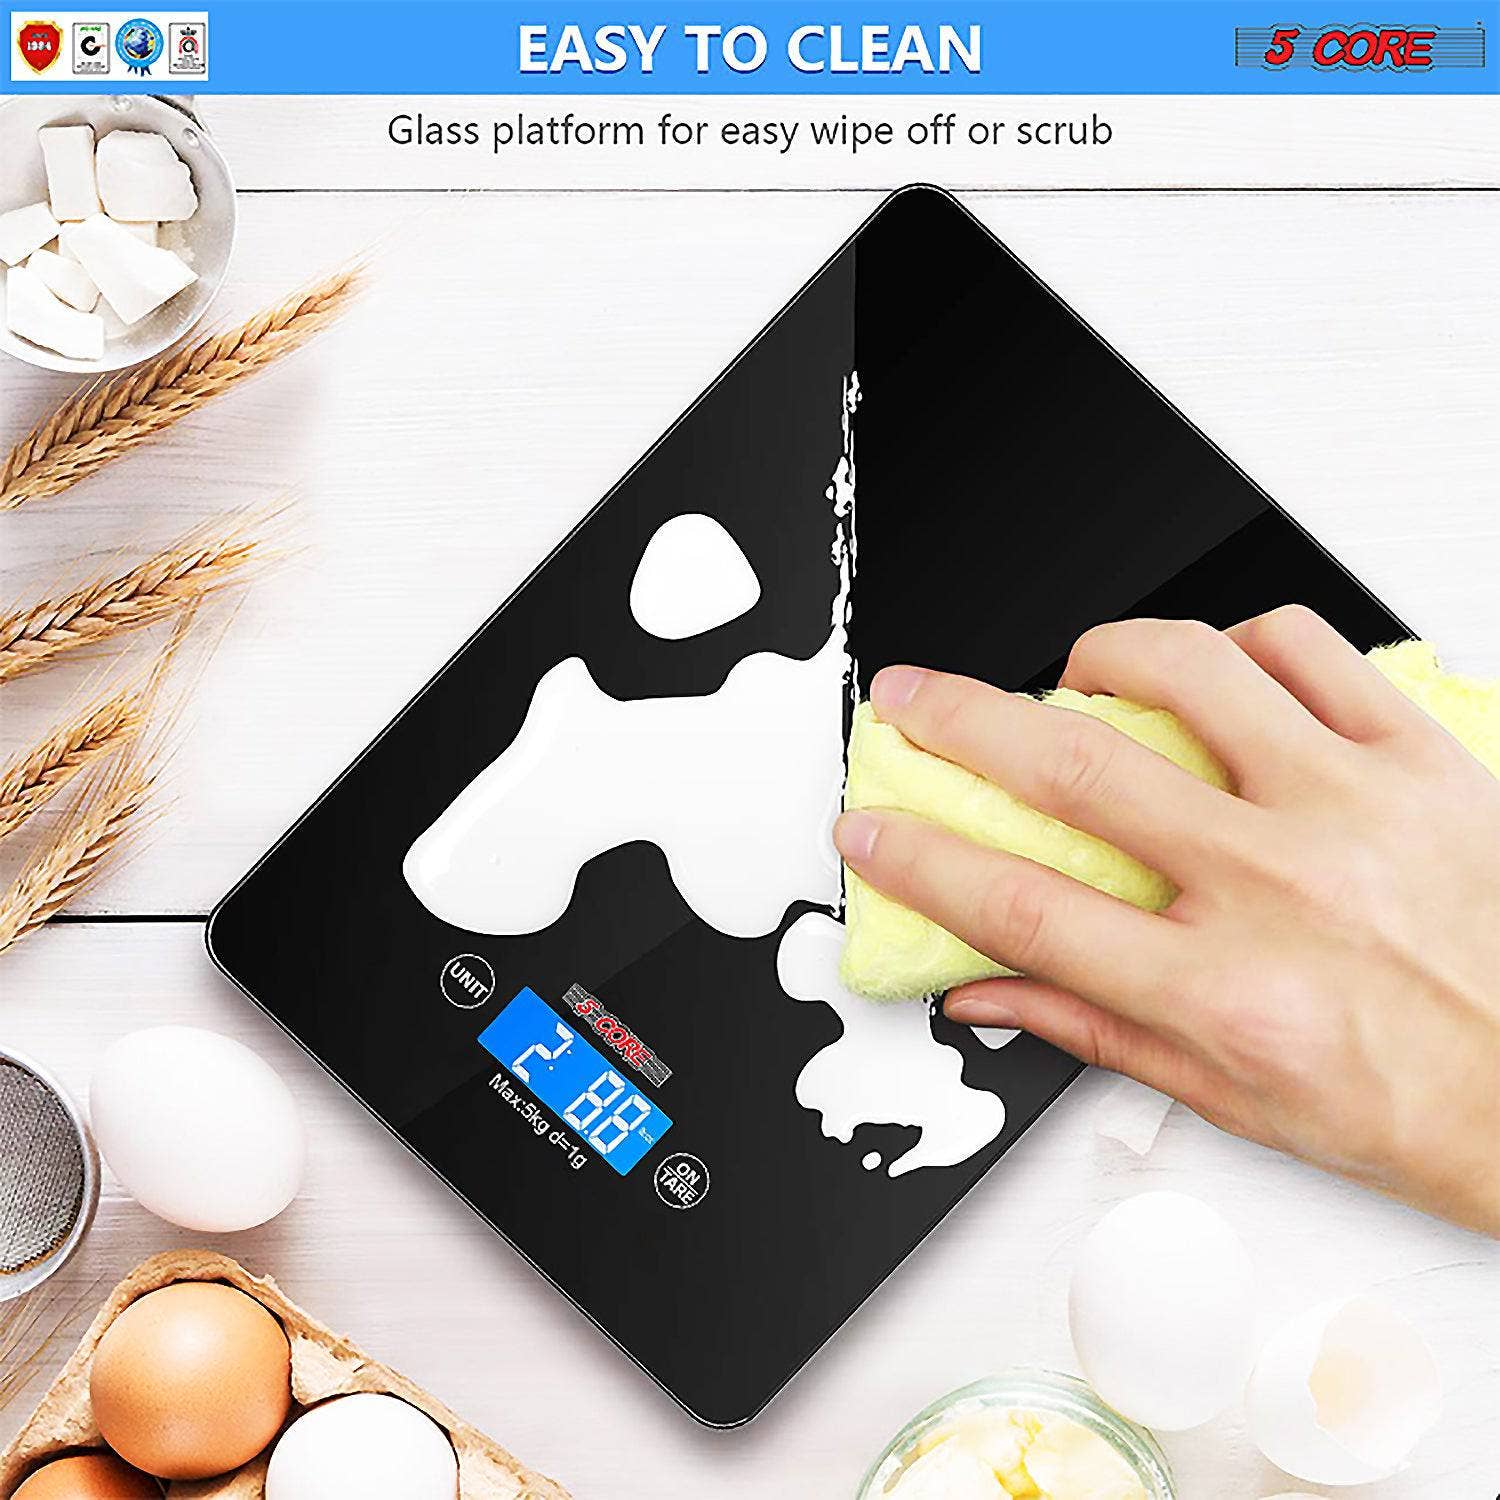 5 Core Inc. - 5 Core Portable Food Kitchen Scale with LCD Display 5 Core Inc.